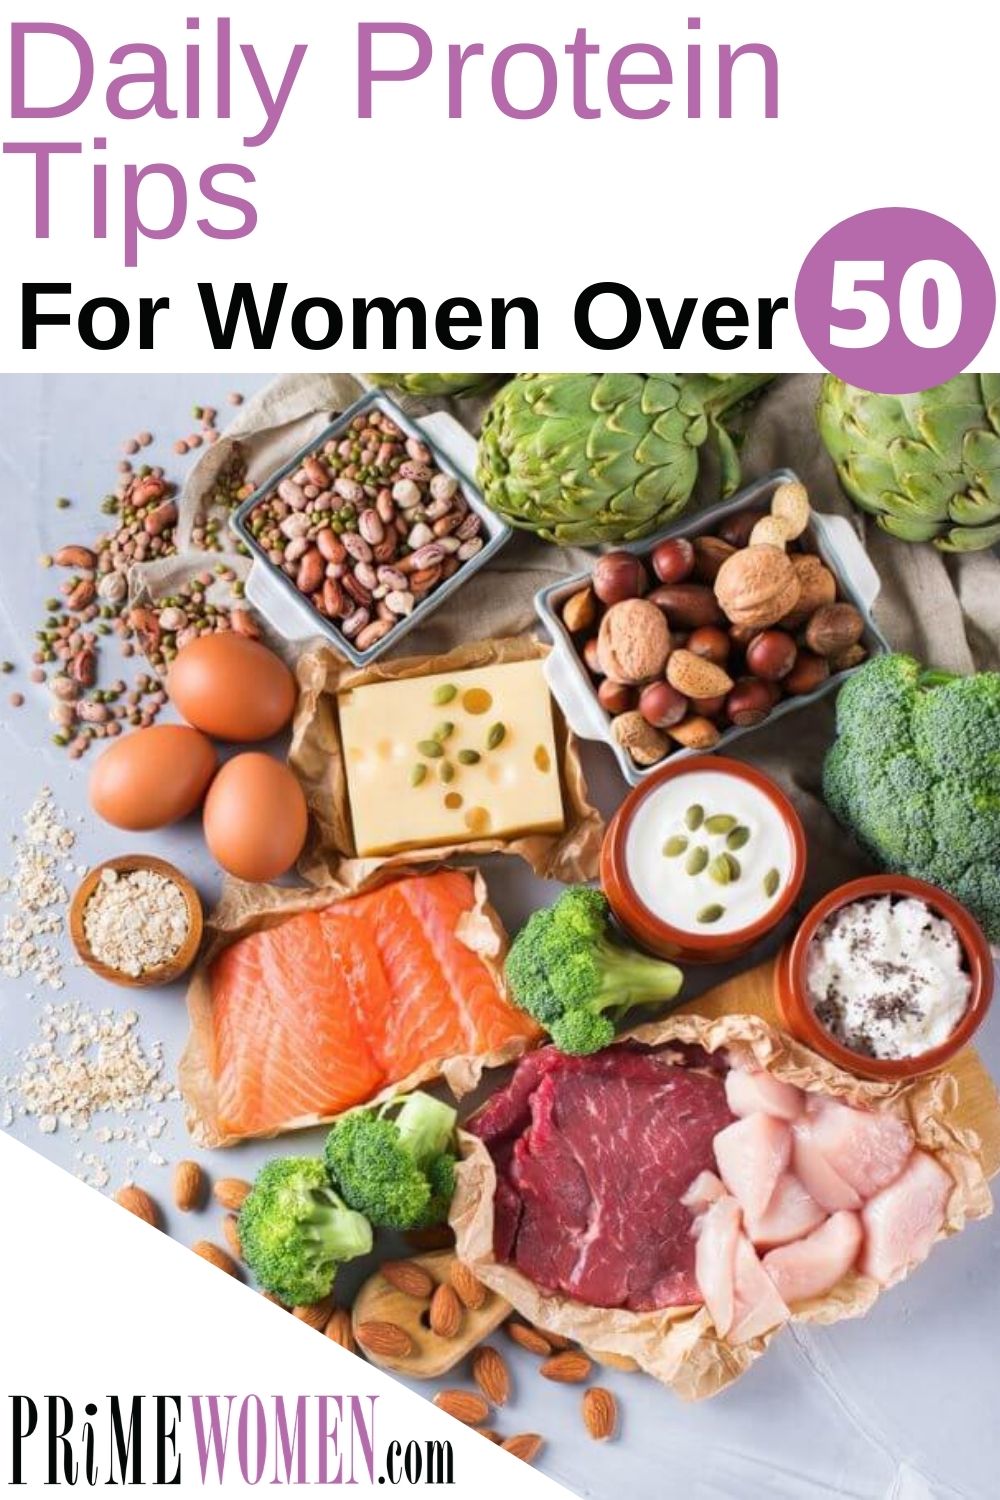 Protein Tips for Women Over 50